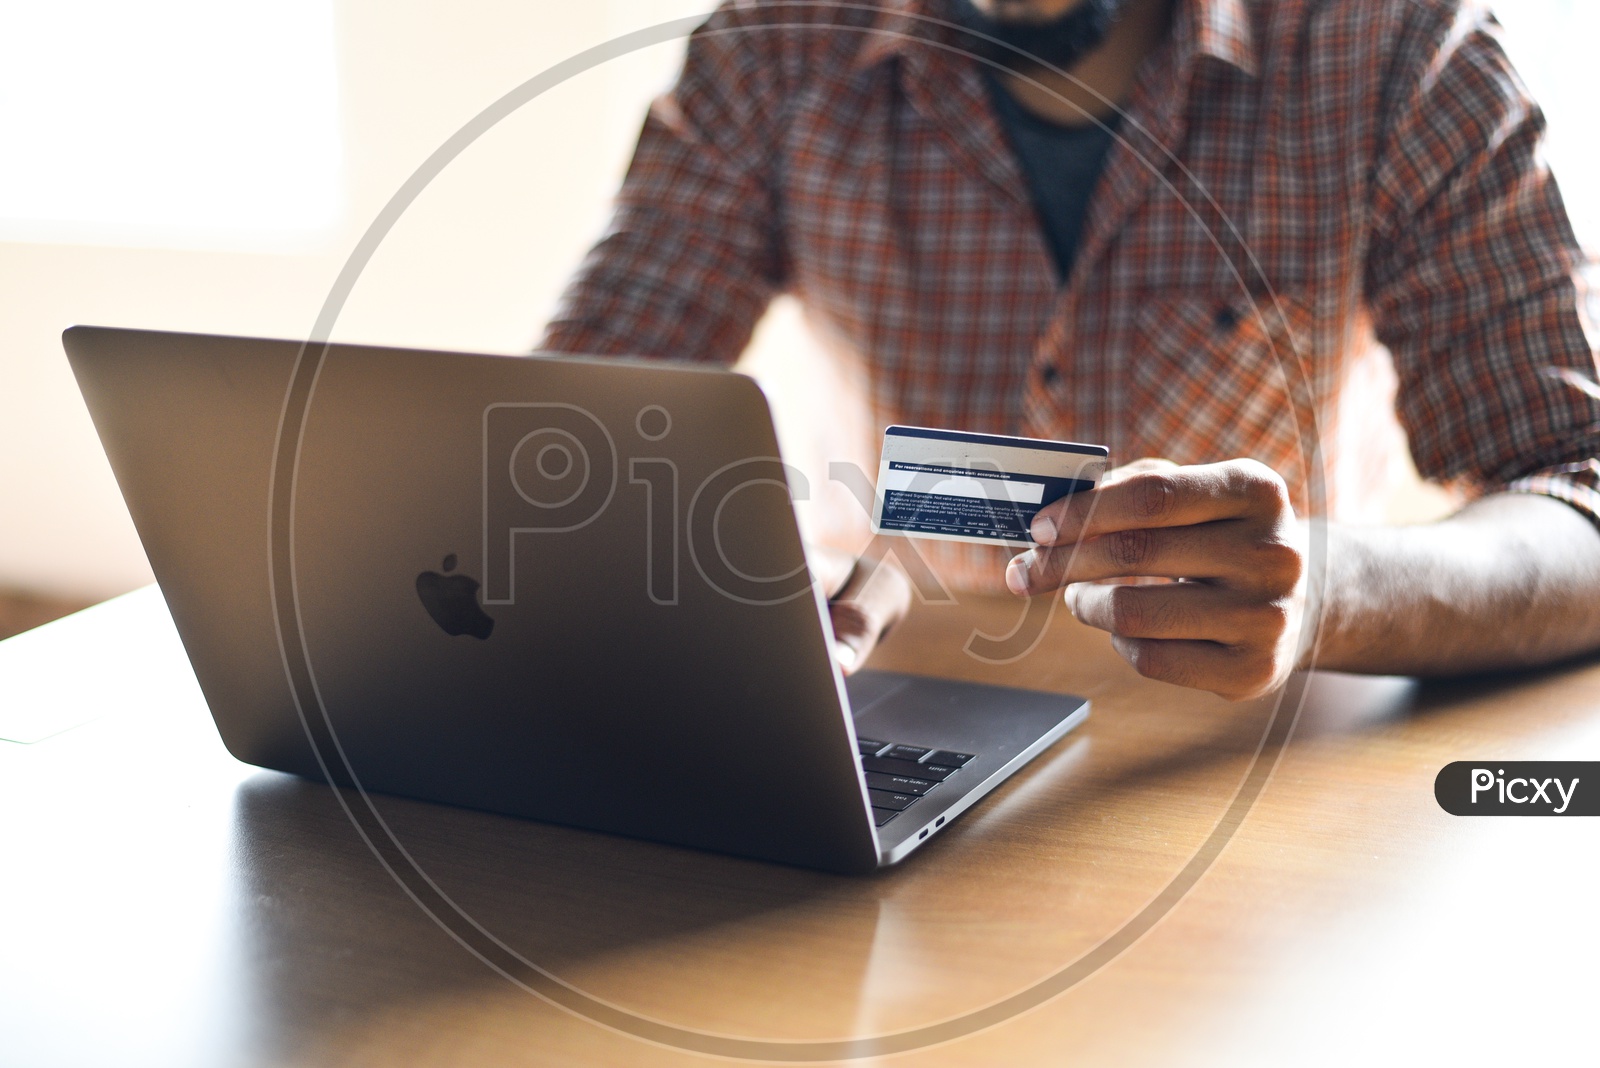 Online Payments Or Online Shopping  A Young Man Using Debit or Credit Card For Online Transaction or Payments in Laptop